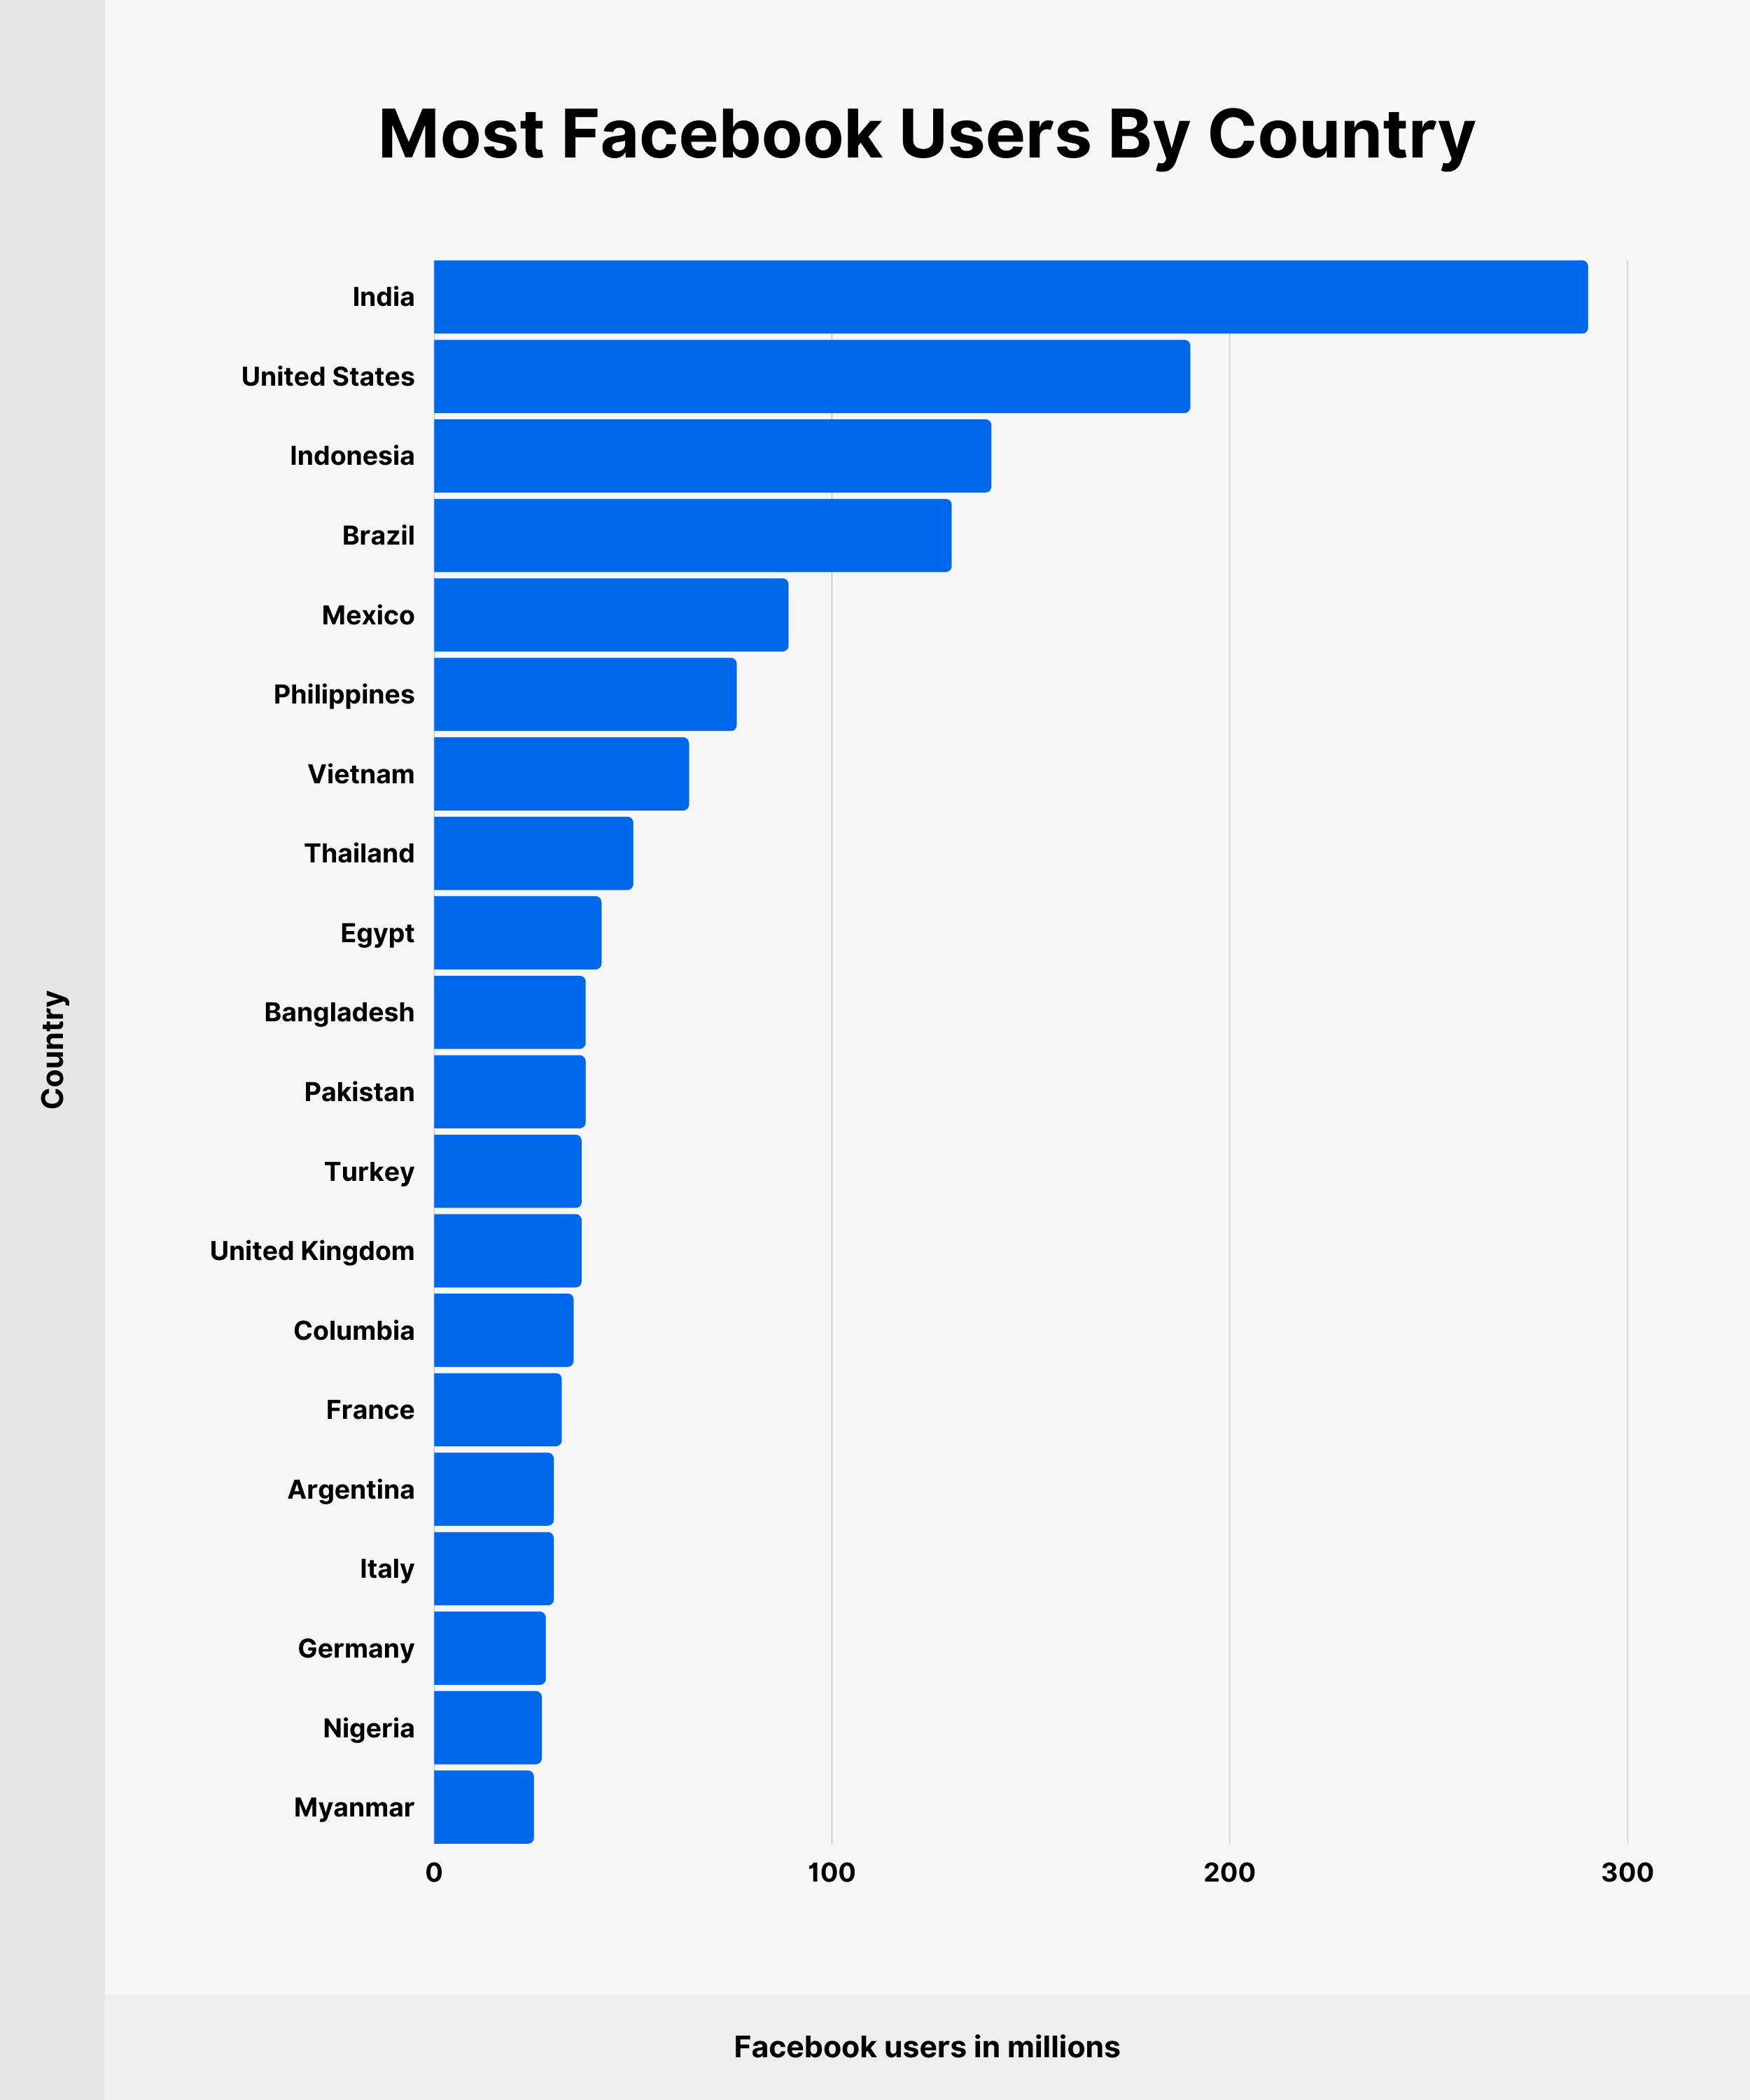 Most Facebook Users By Country